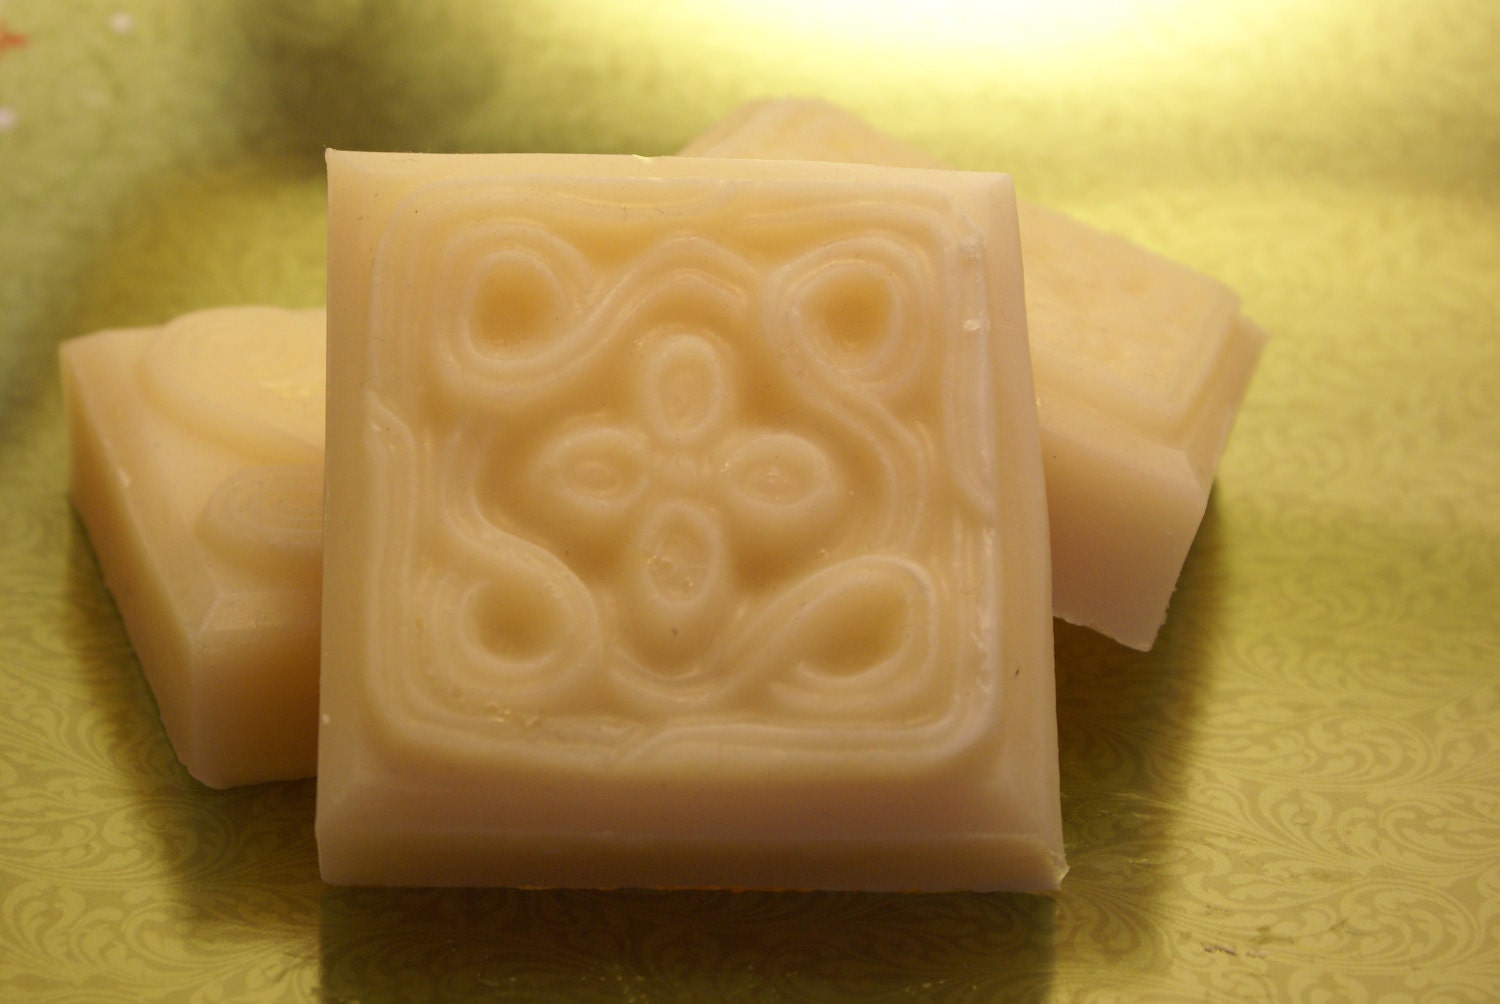 All Natural Ever Green Love Cold Process Soap Vegan Friendly